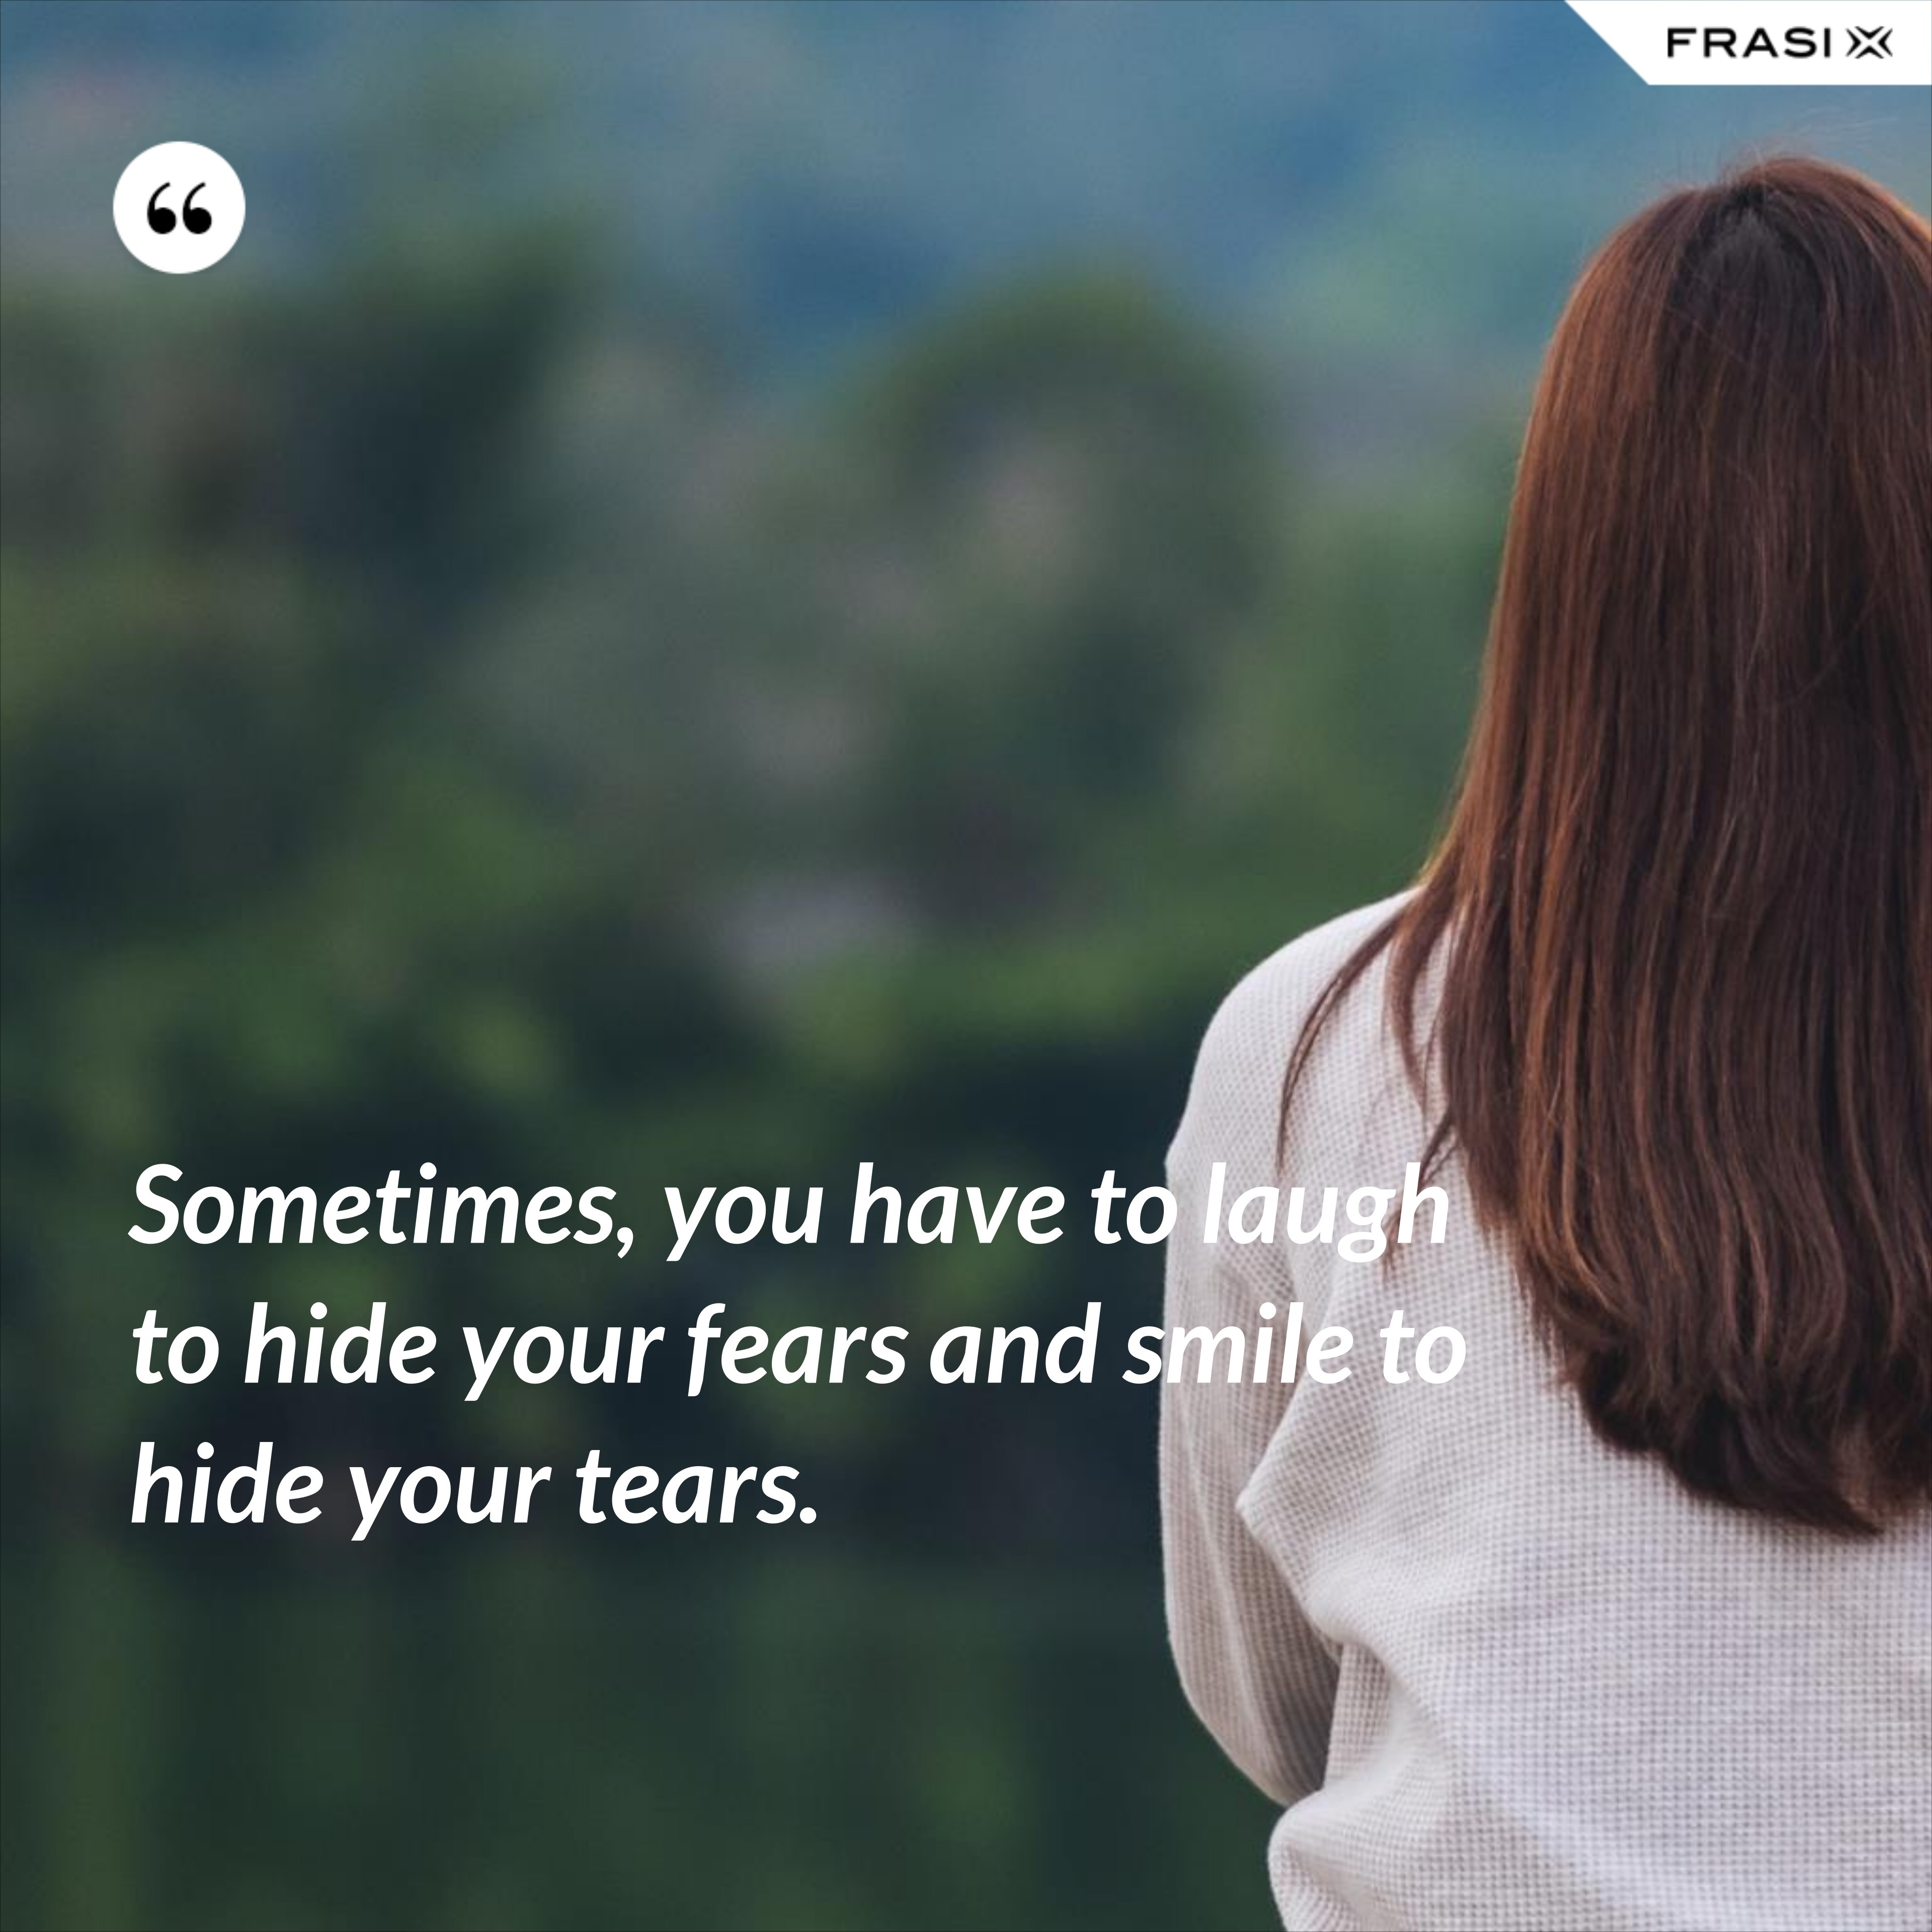 Sometimes, you have to laugh to hide your fears and smile to hide your tears. - Anonimo